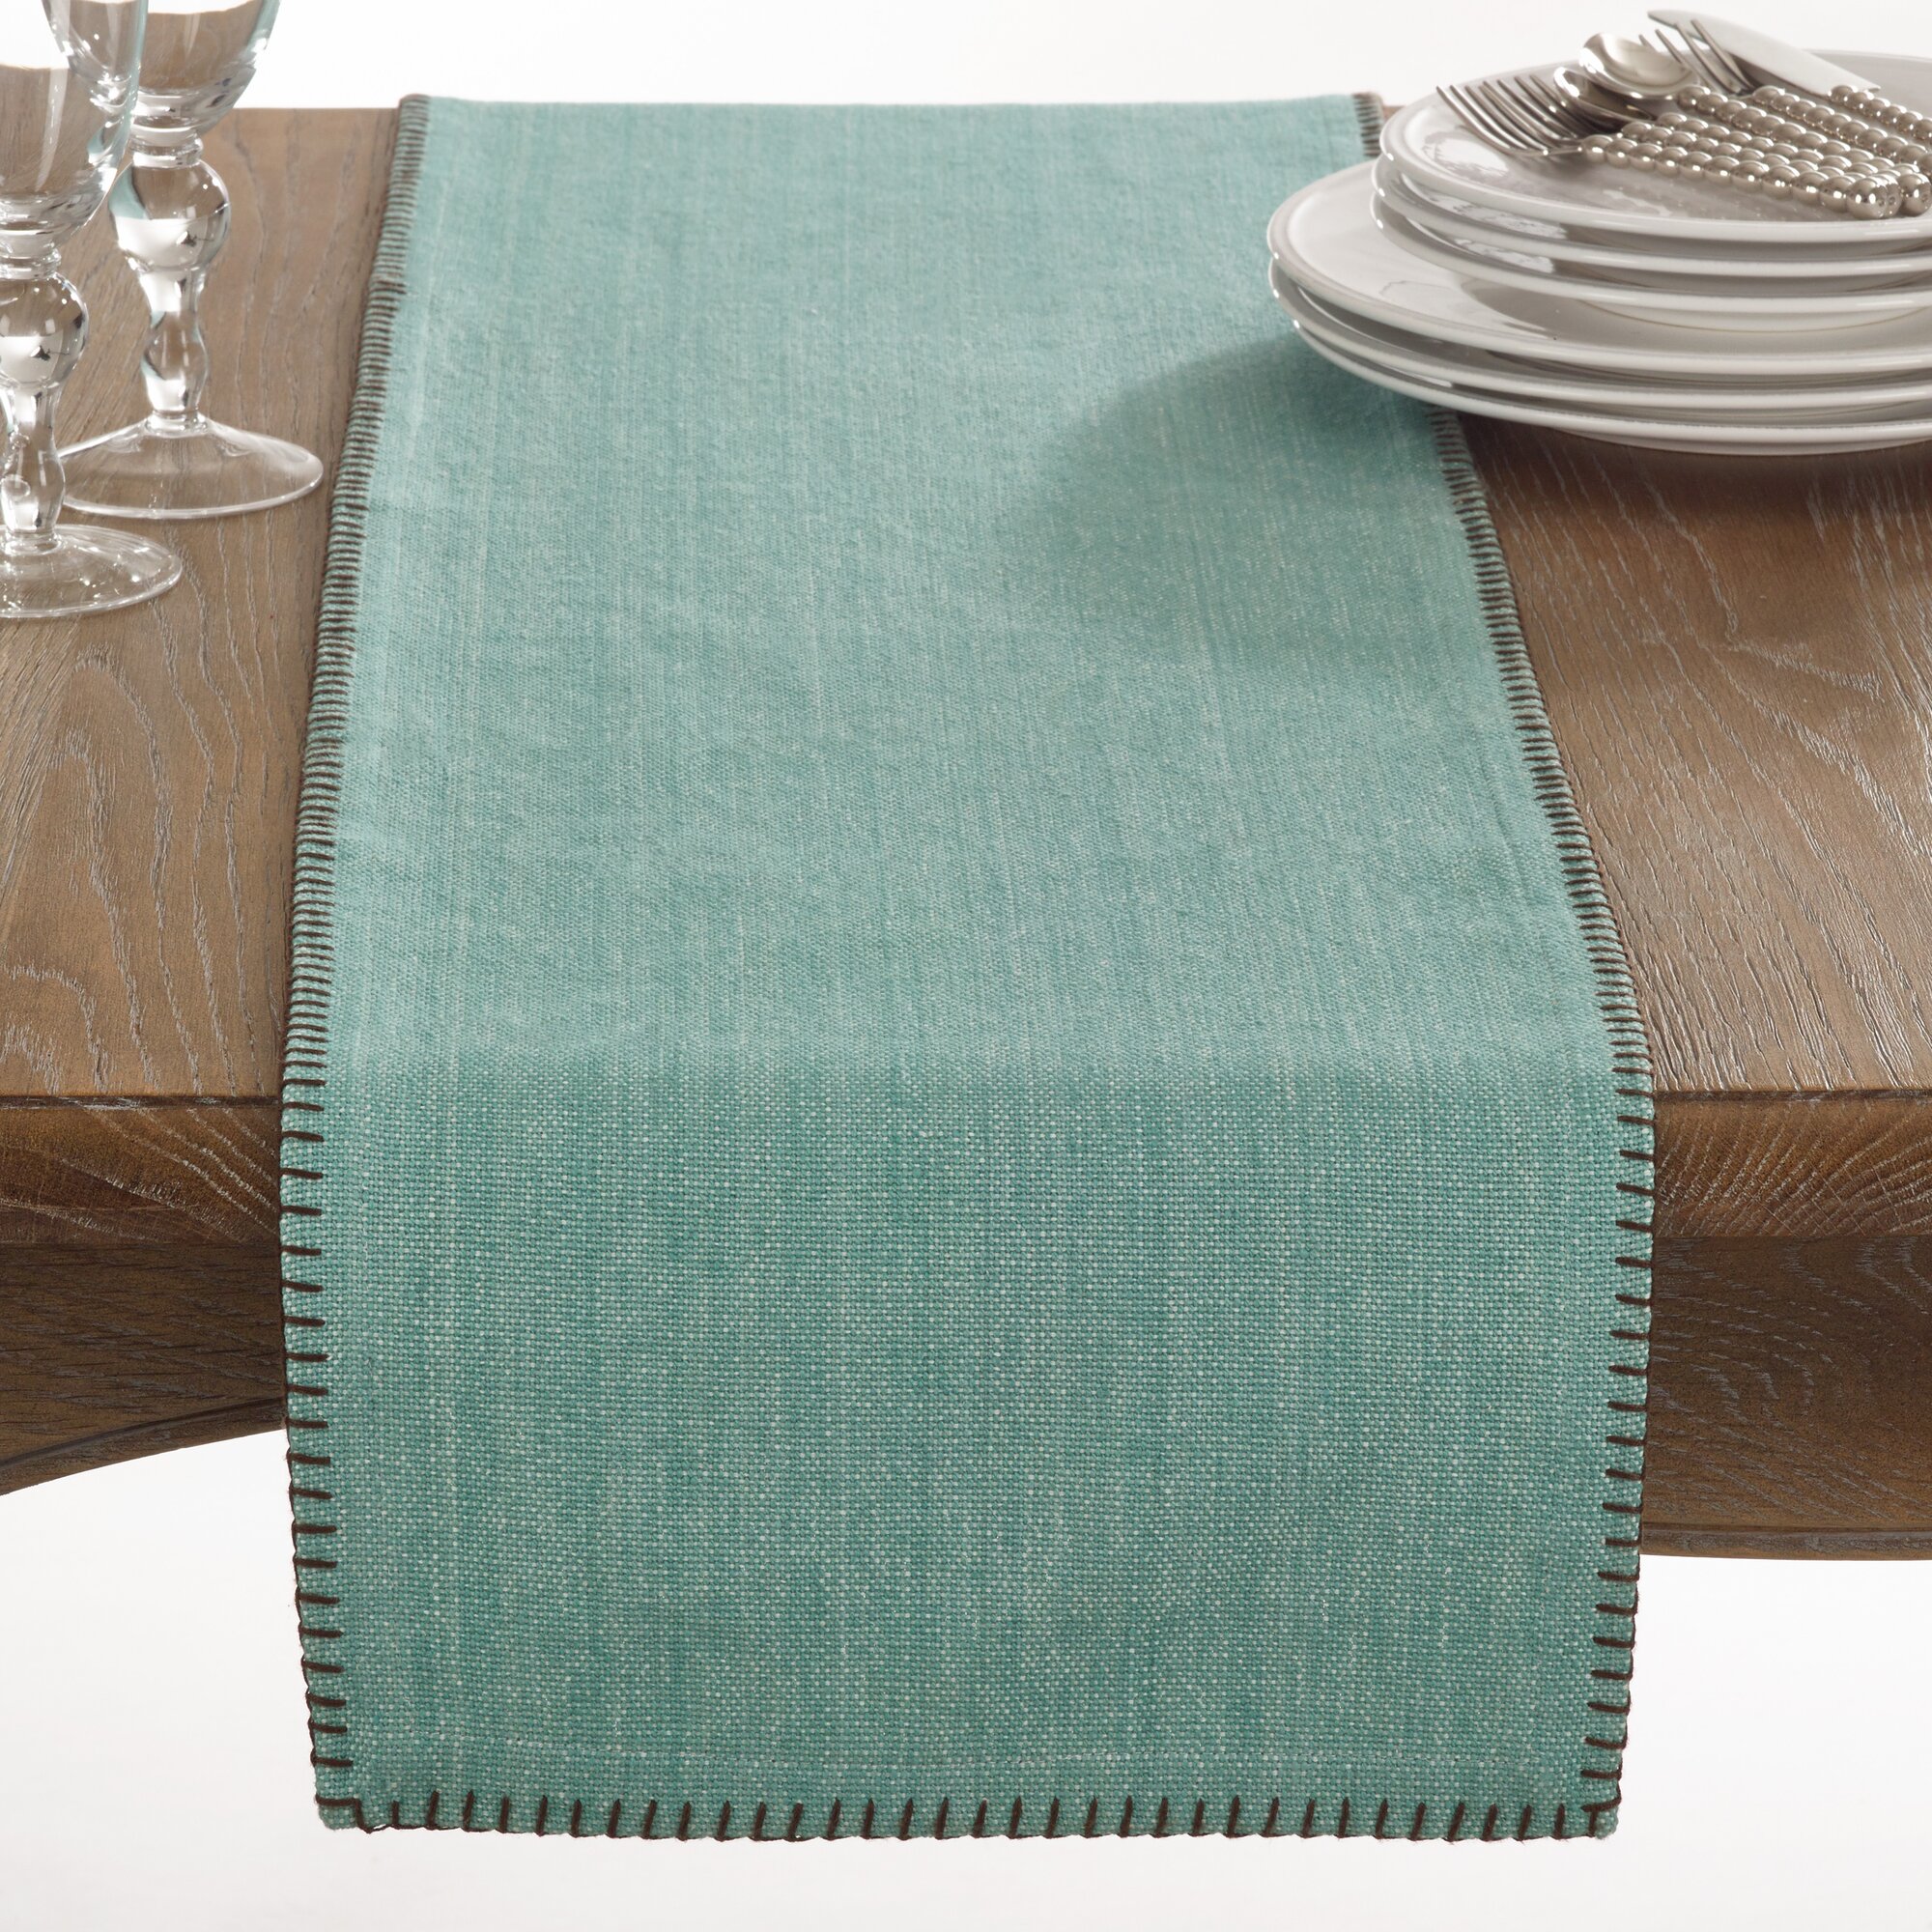 St. Lawrence Whip Stitched Table Runner